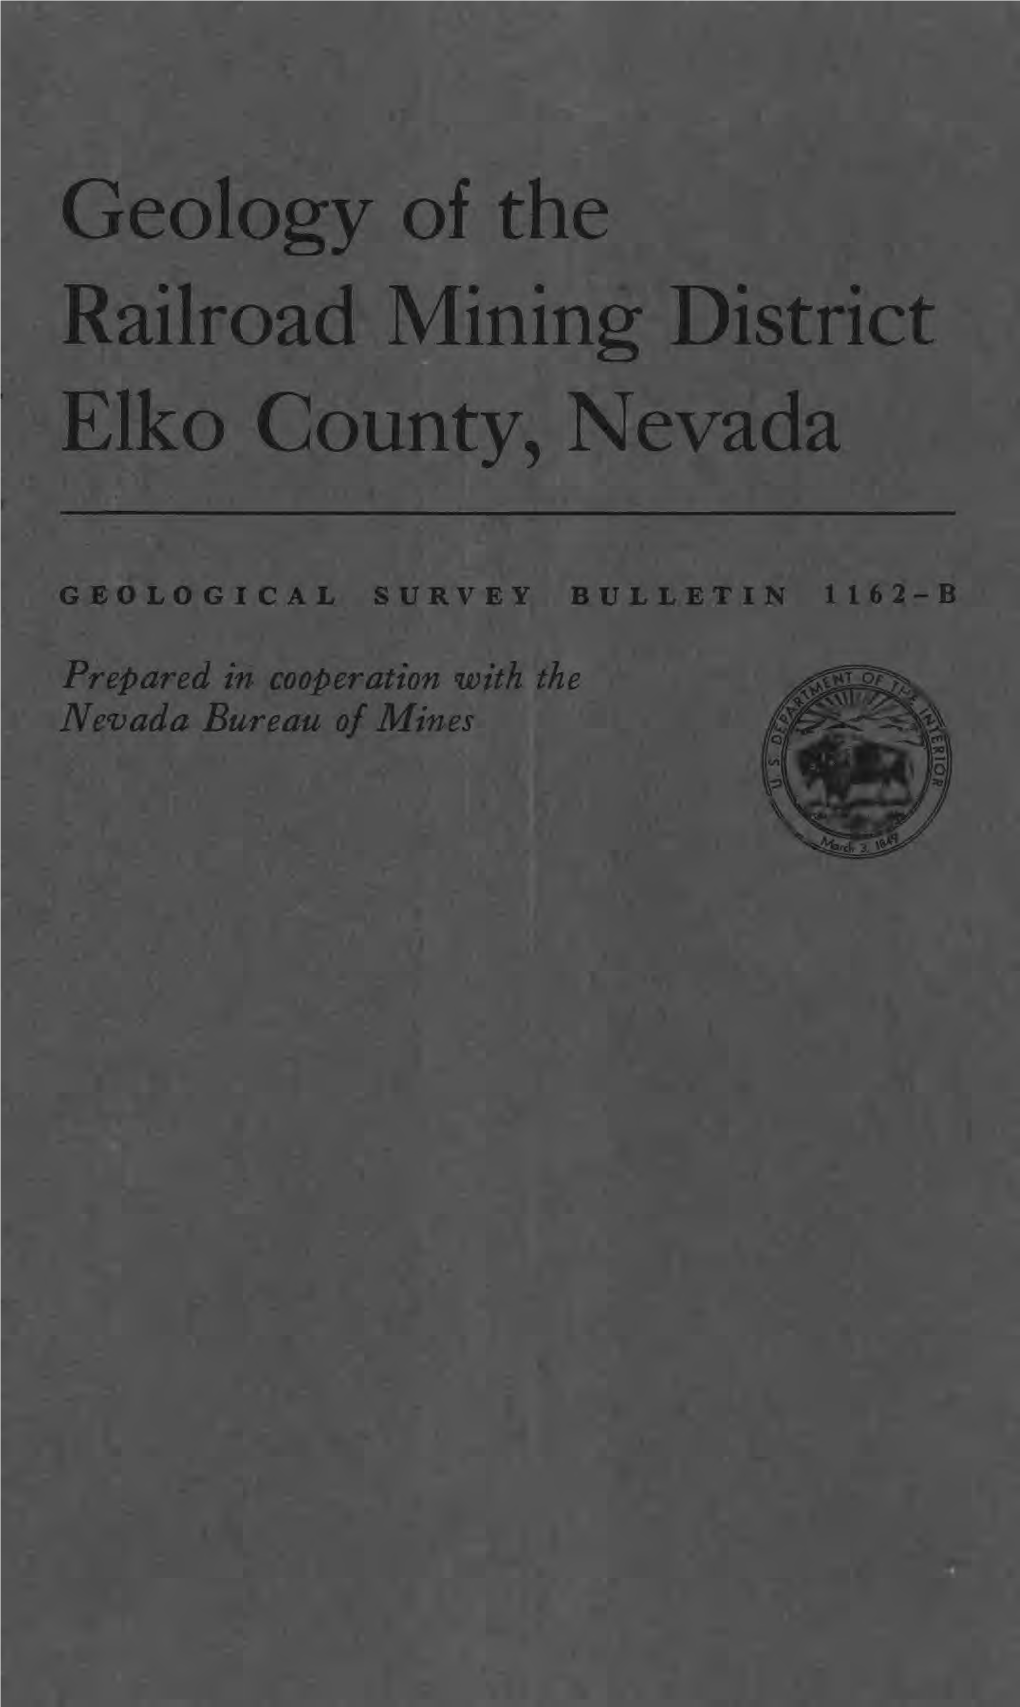 Geology of the Railroad Mining District Elko County, Nevada